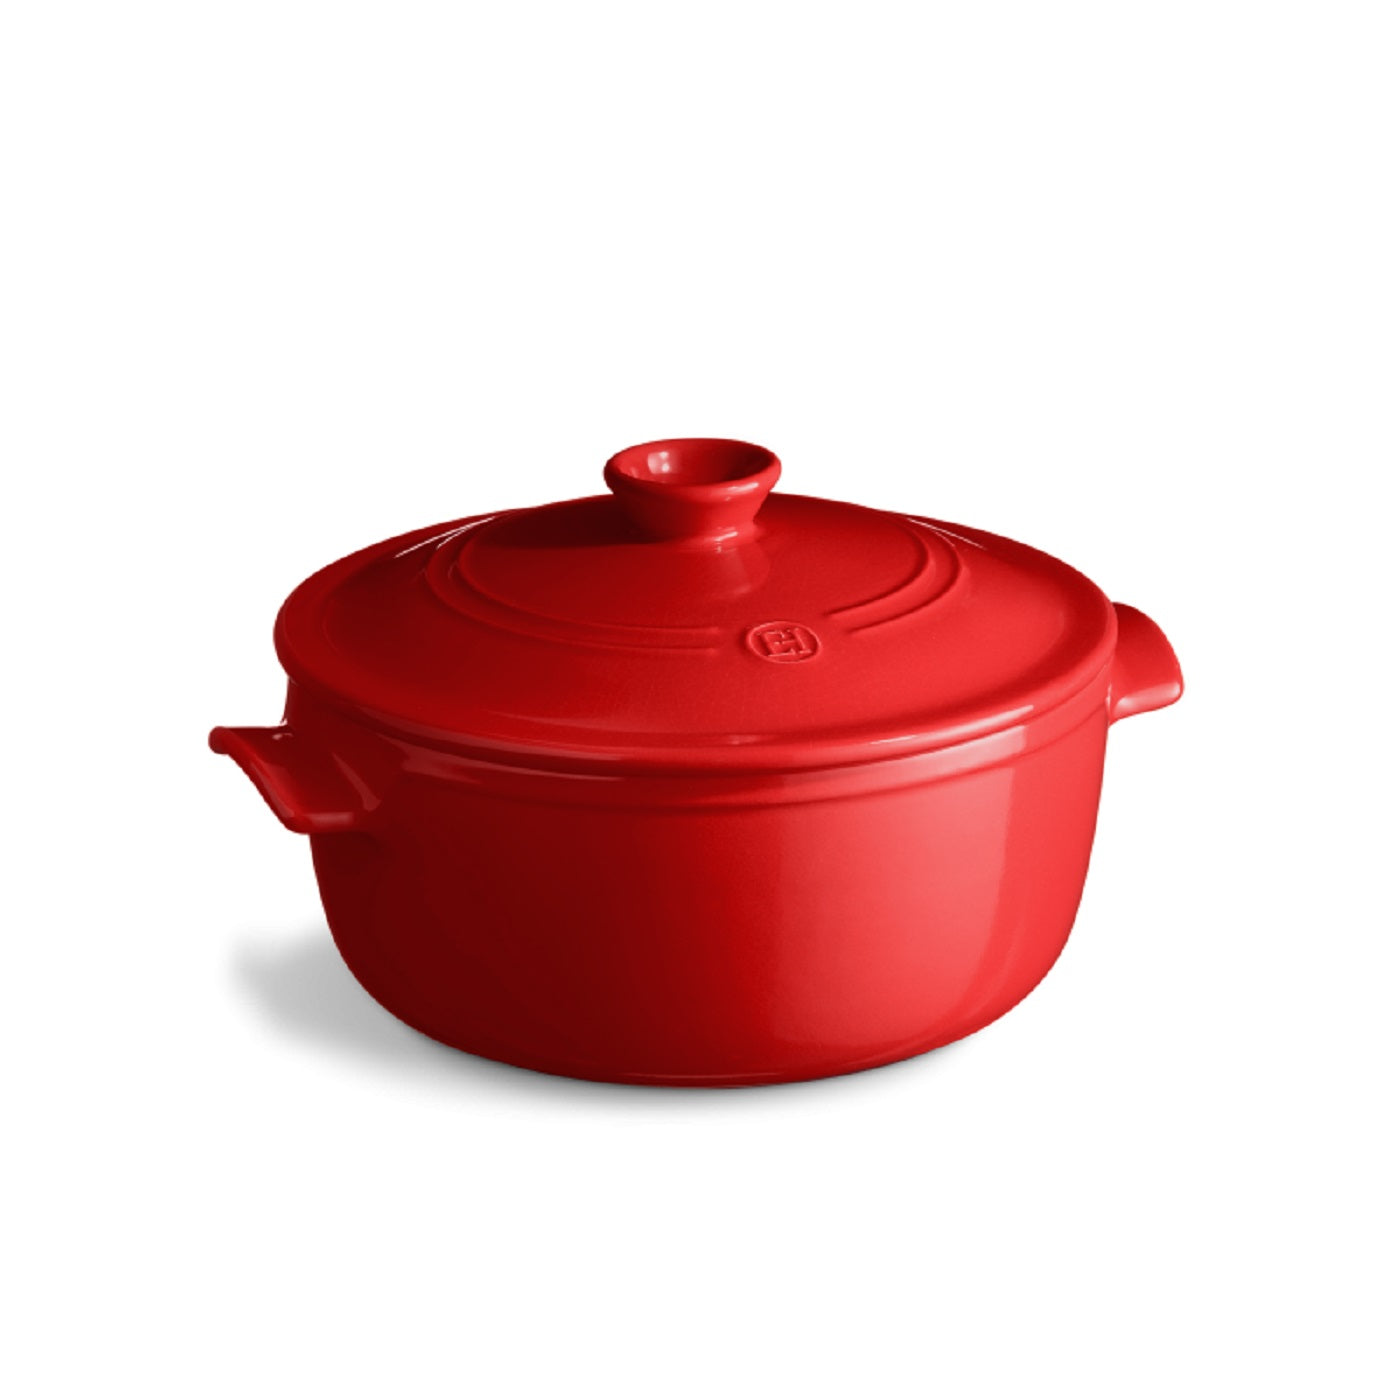 Emile Henry Round Cocotte 24 cm, Red